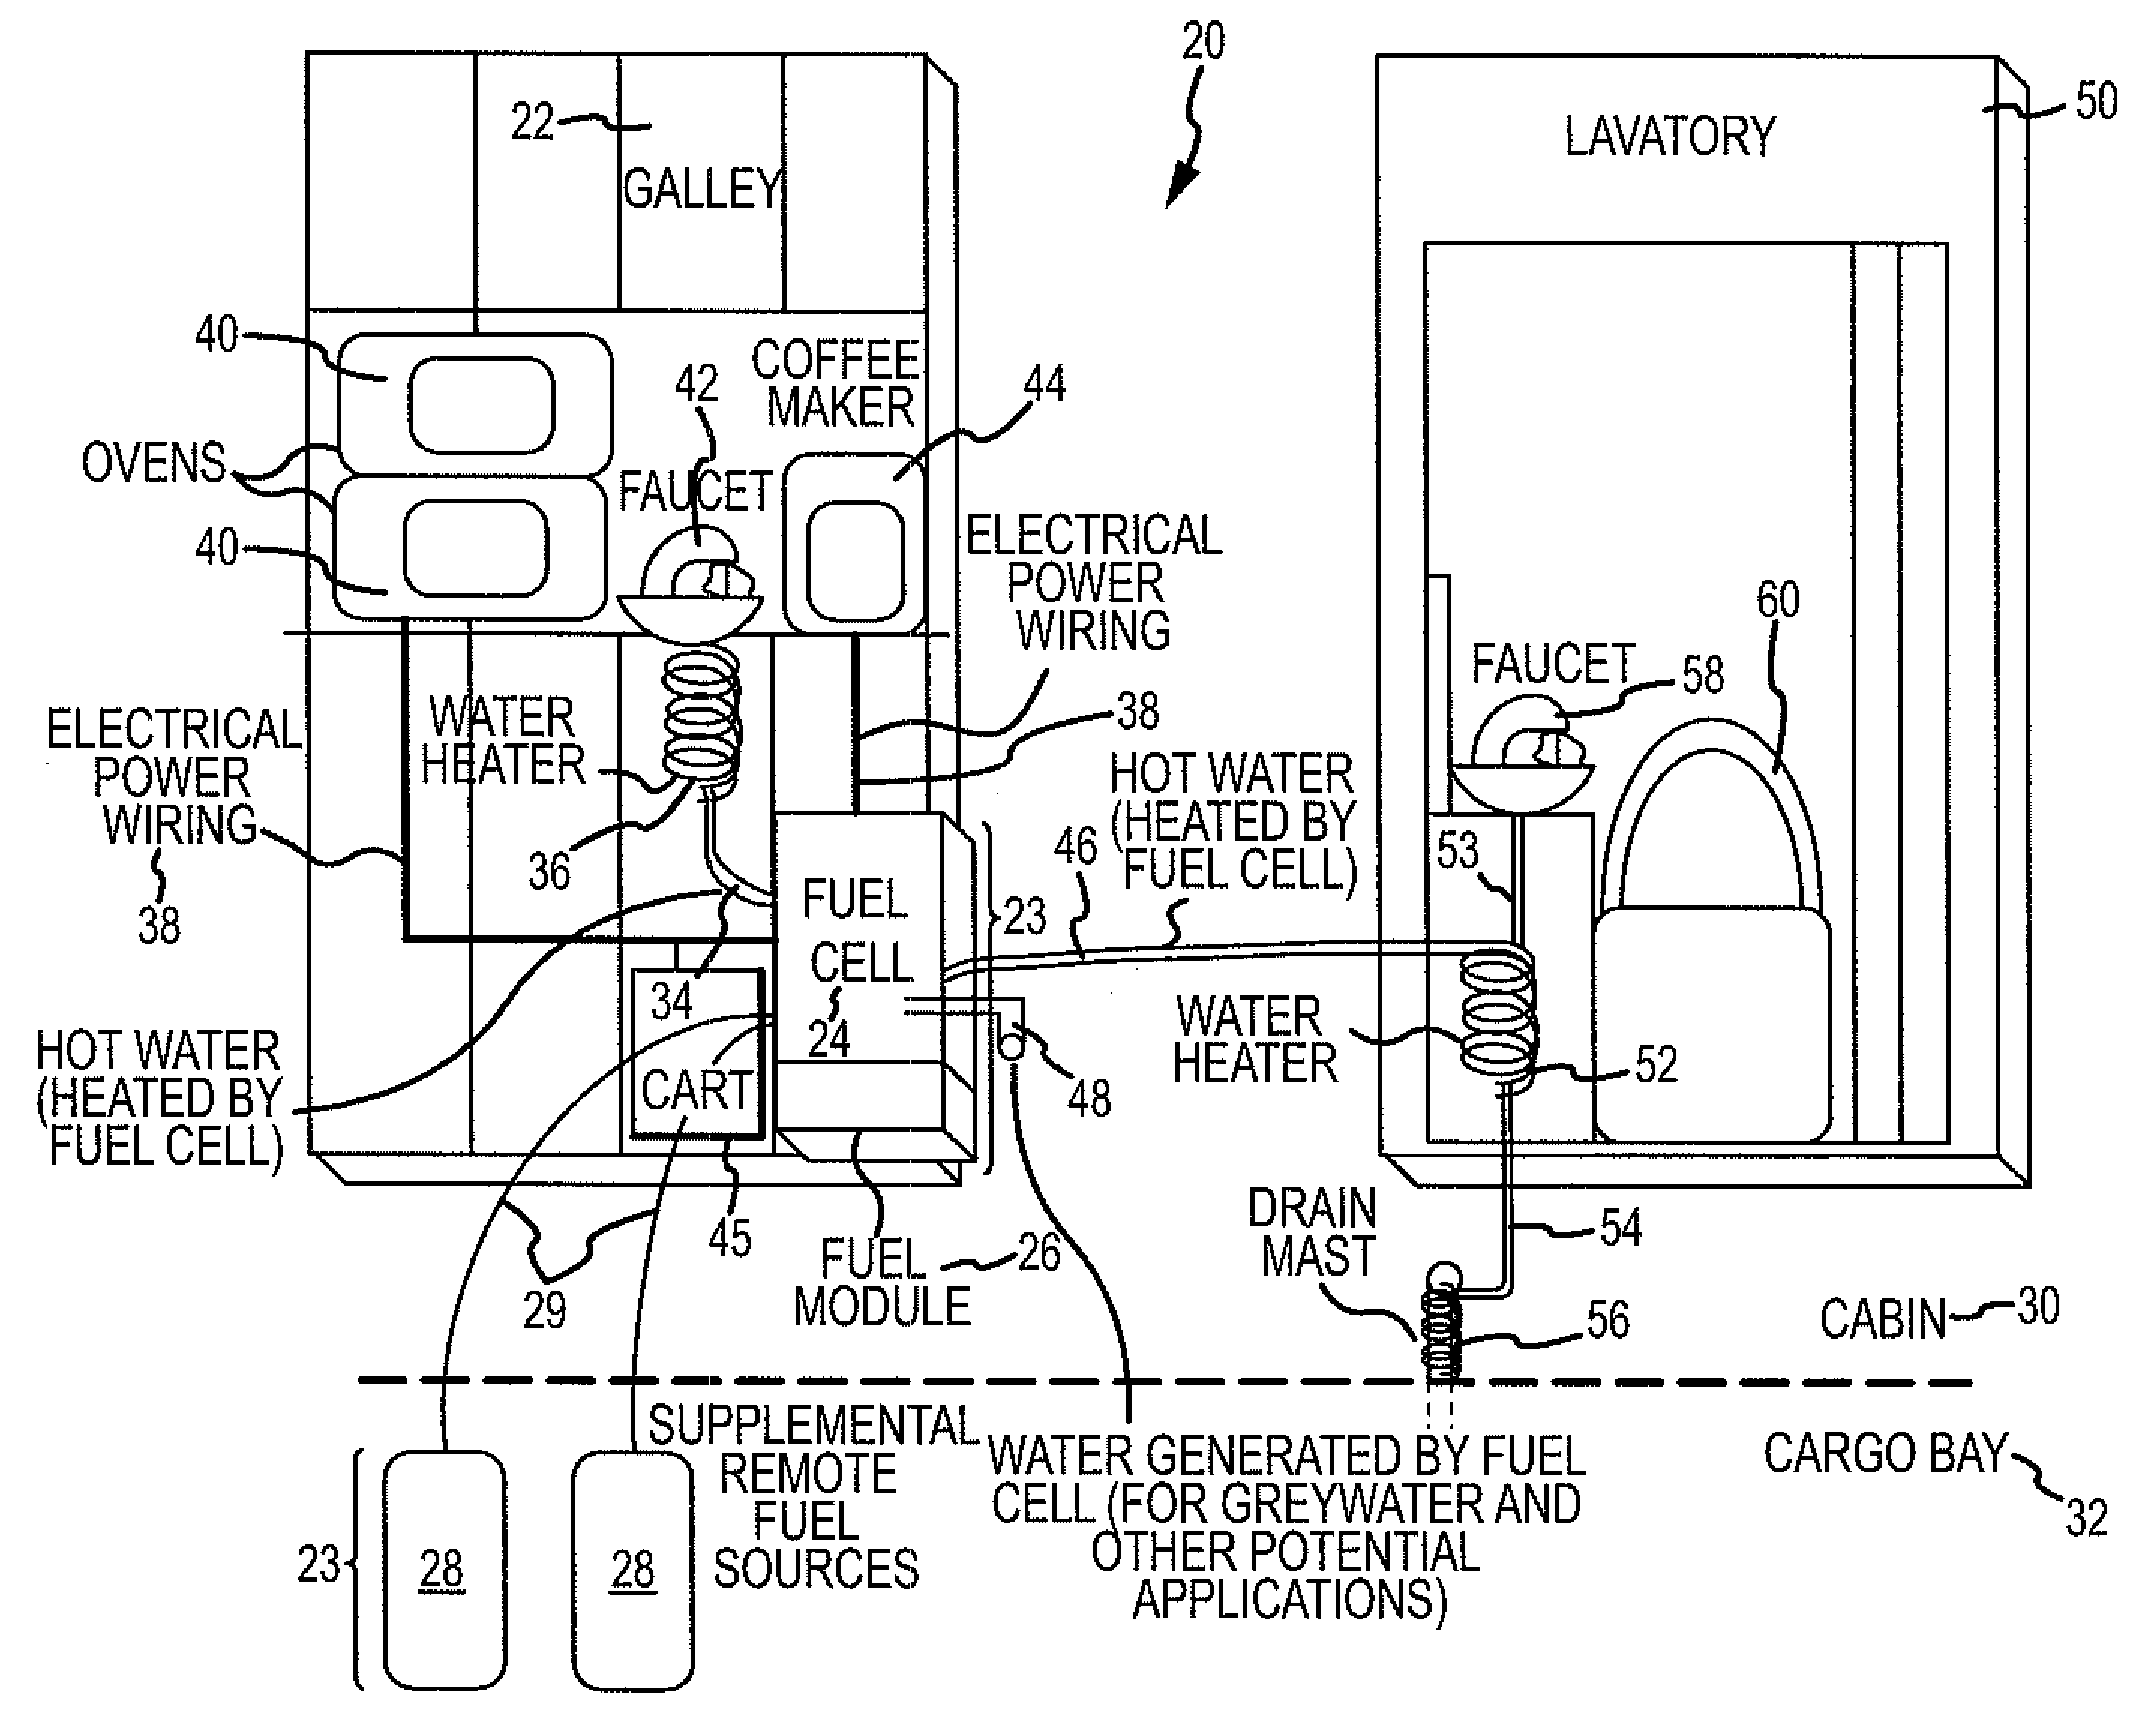 Localized utility power system for aircraft